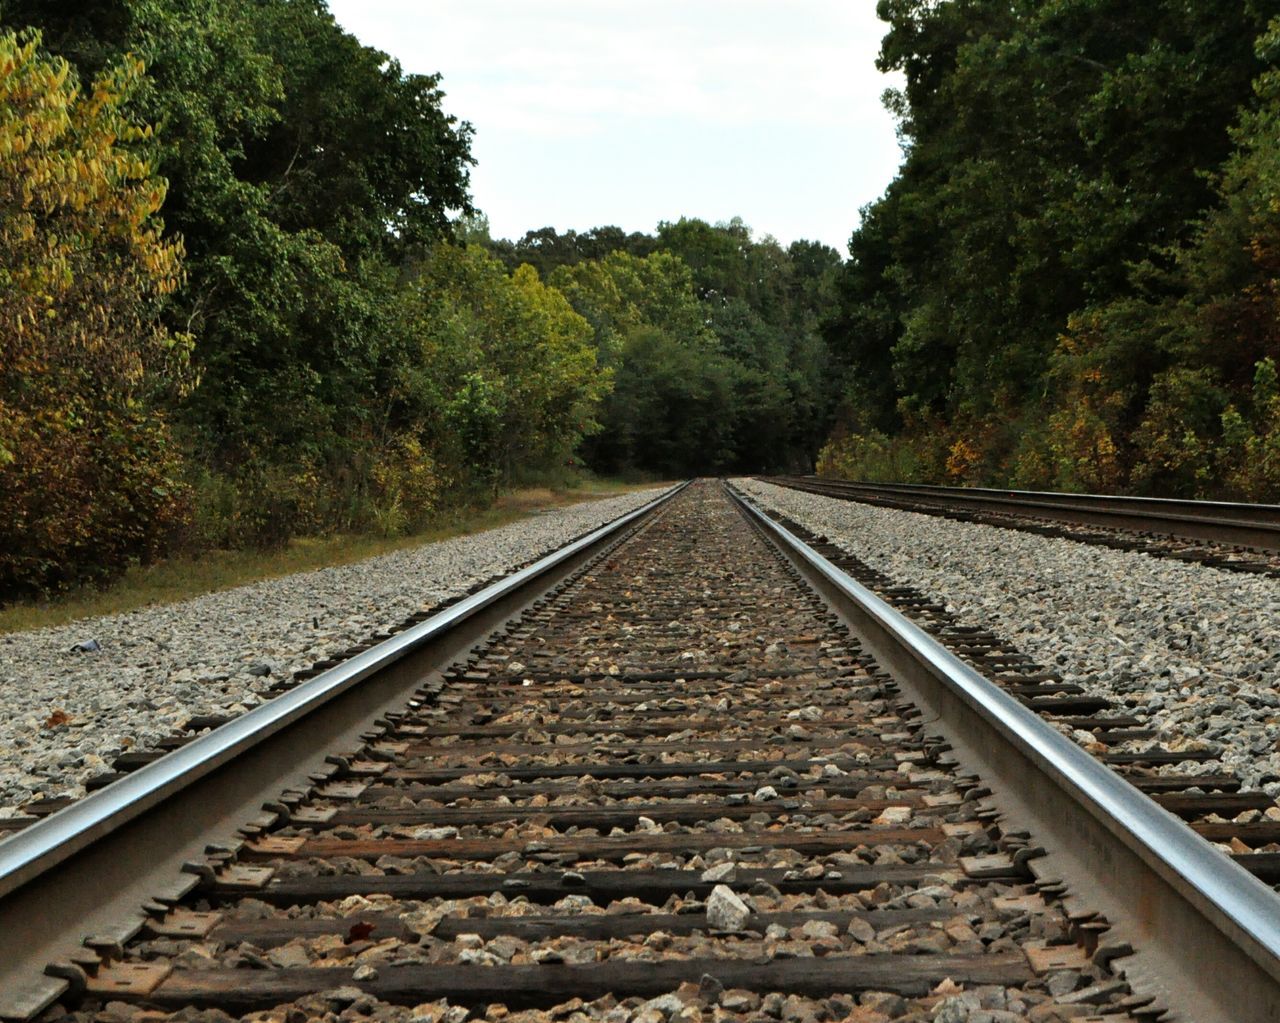 railroad track, rail transportation, tree, transportation, the way forward, diminishing perspective, vanishing point, railway track, public transportation, stone - object, straight, day, sky, no people, nature, growth, gravel, tranquility, outdoors, long